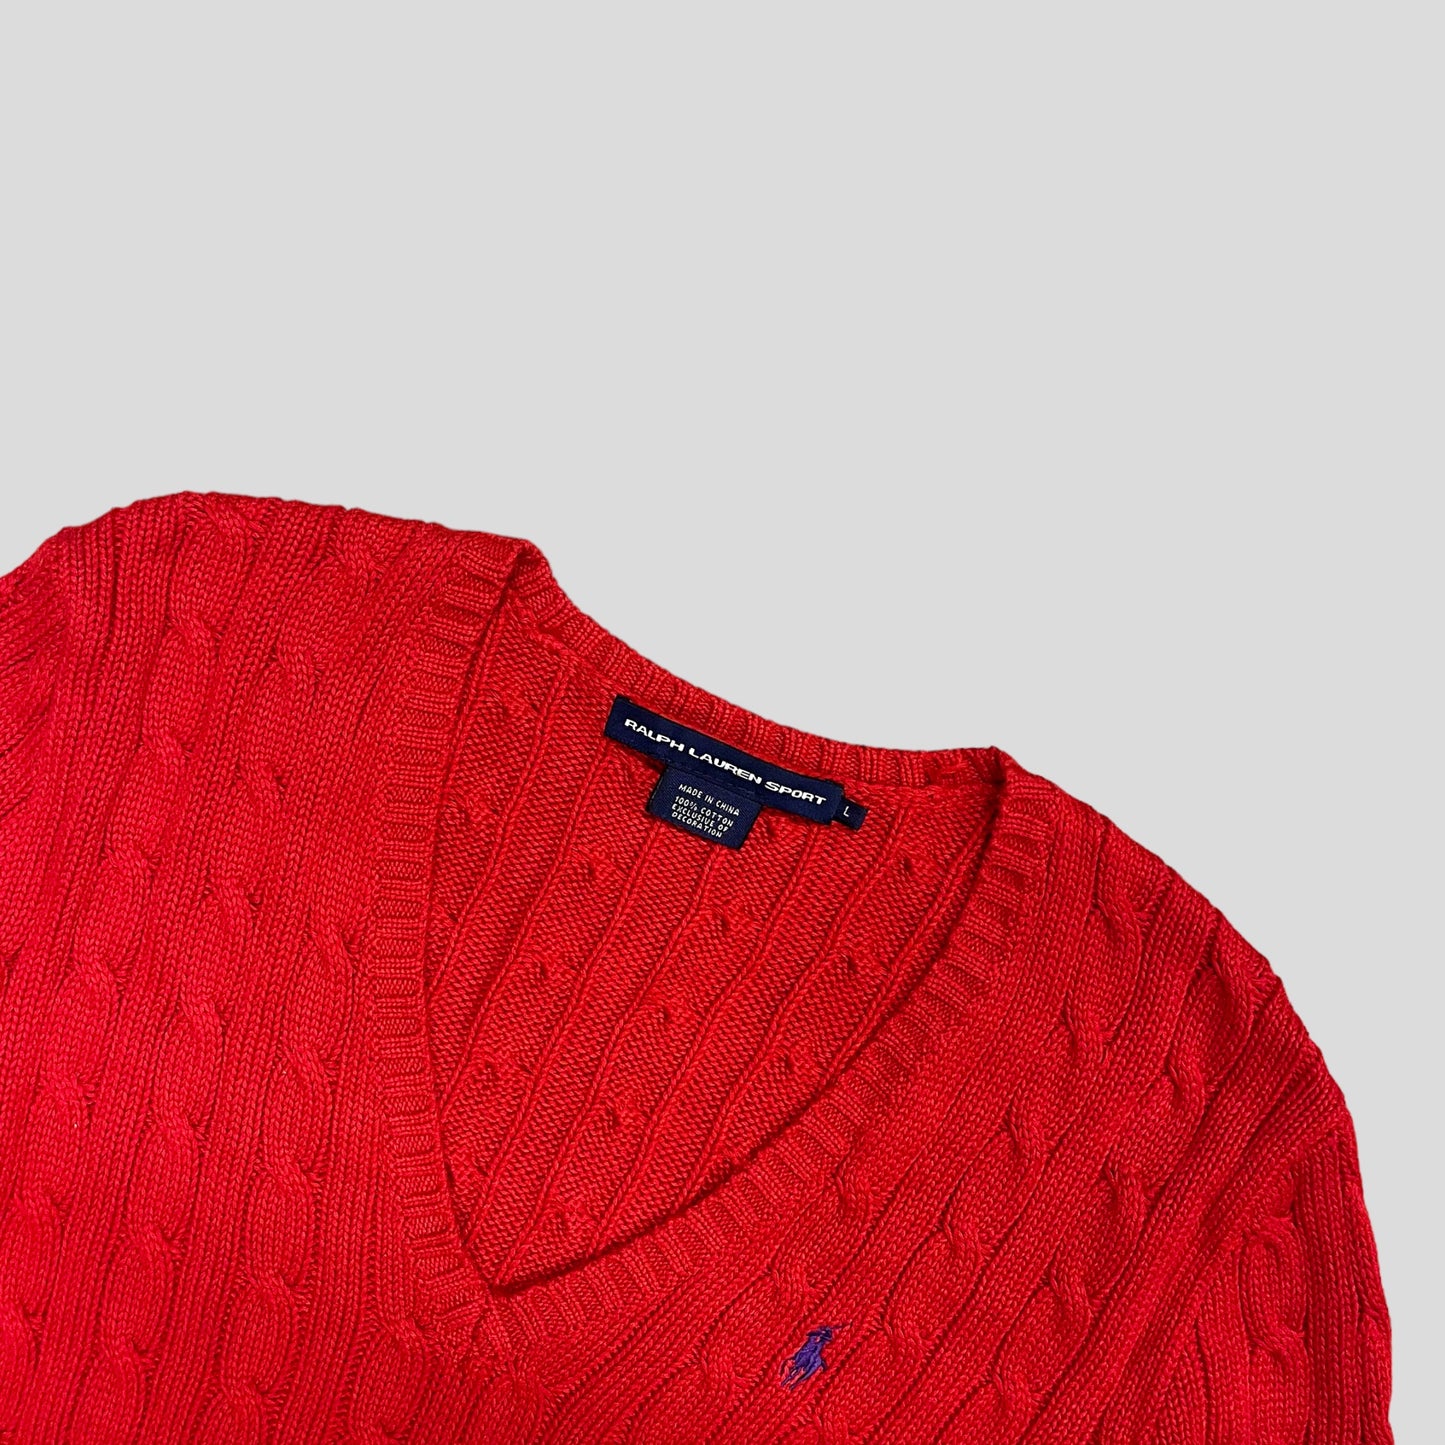 Ralph Lauren Cable Knit Red